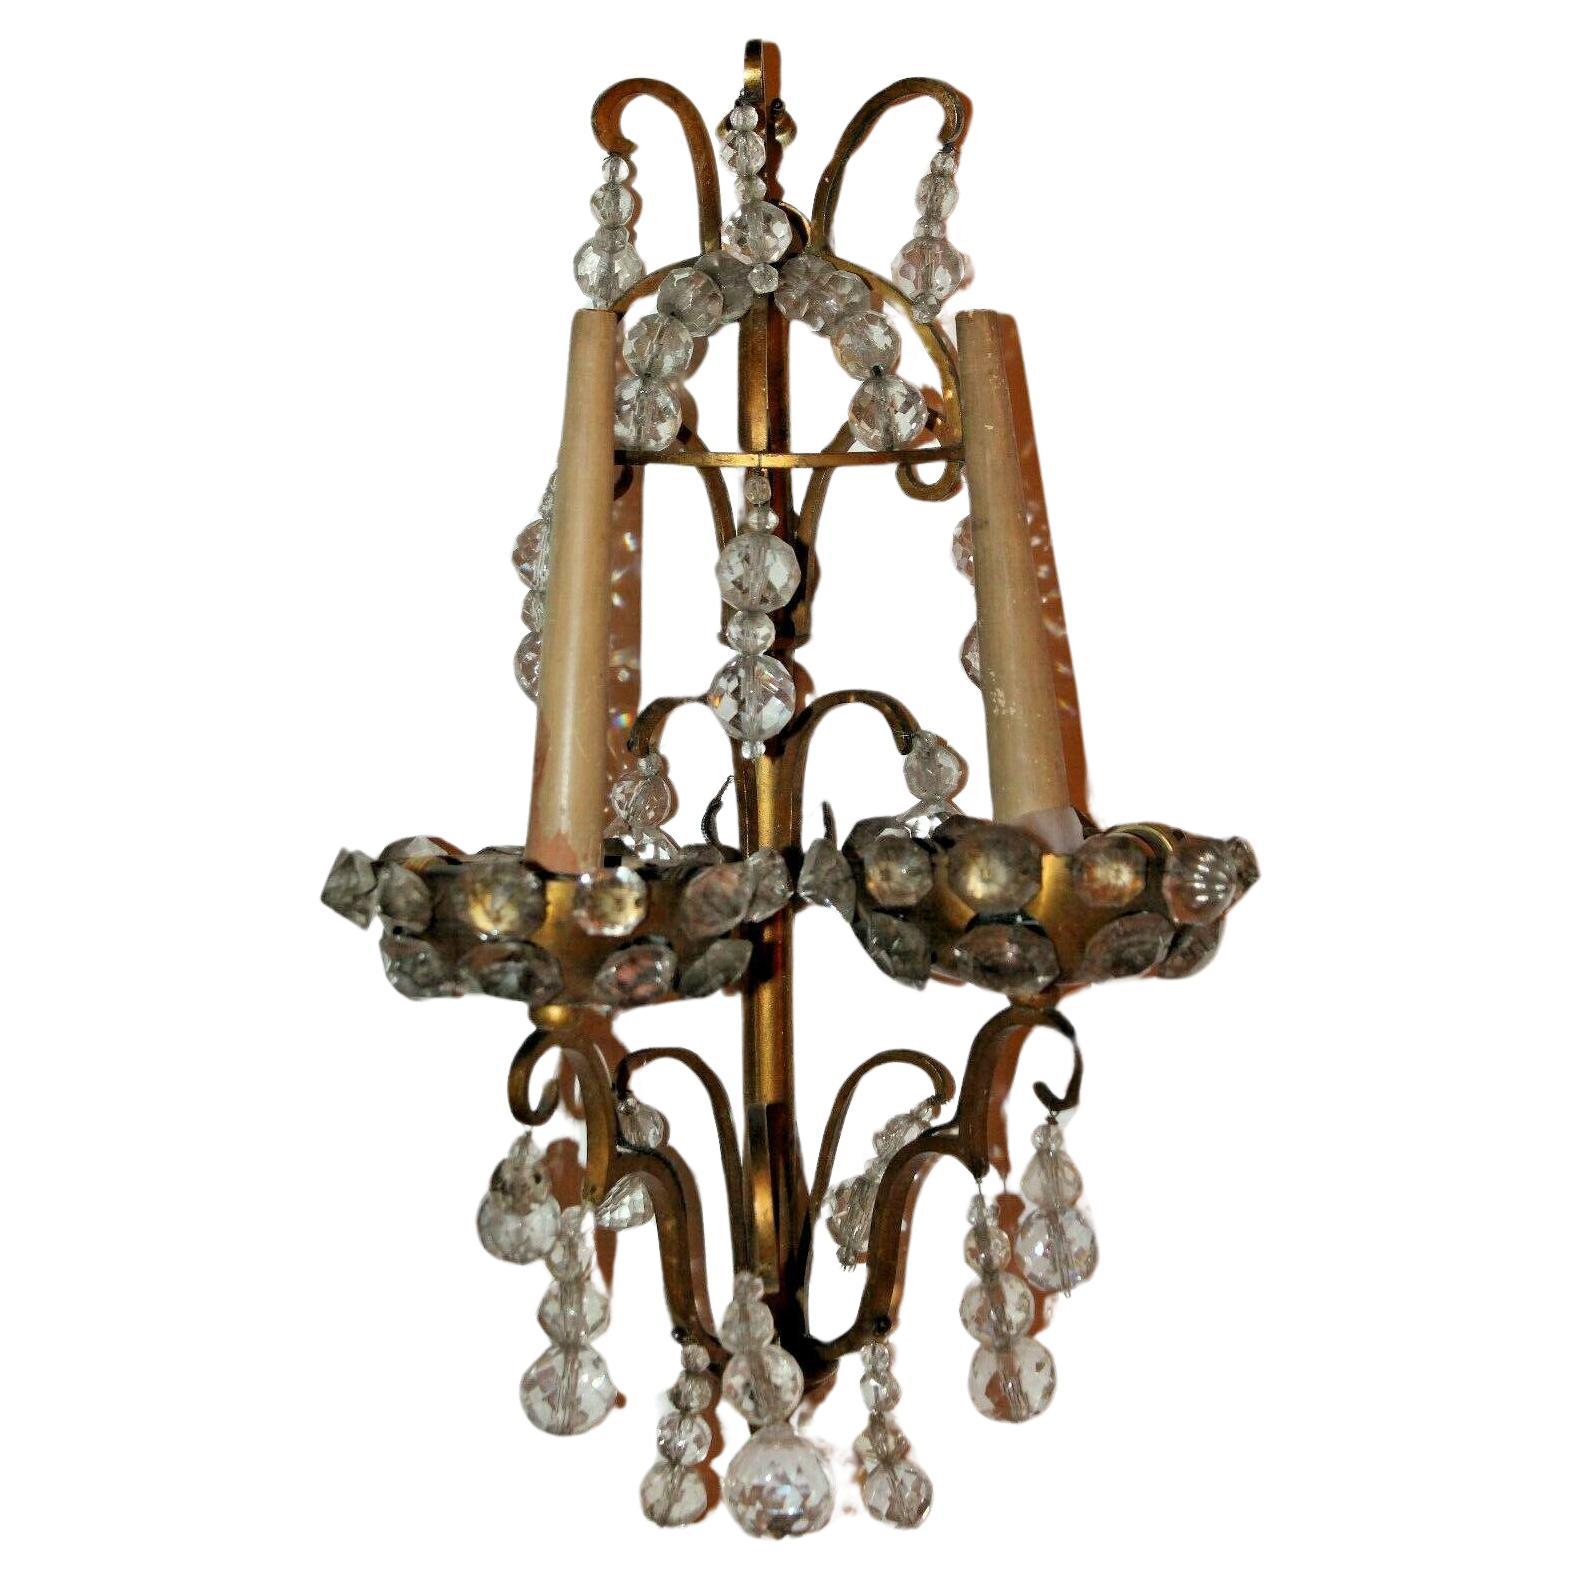 Pair 1930's French Louis XV Rococo style Gilt Bronze with Cut Crystal Wall Sconces attrib. Maison Jansen. These sconces are marked and are of the highest quality. 2 lights tucked in each bobesche. Faux candle tapers. Reminescent of the 